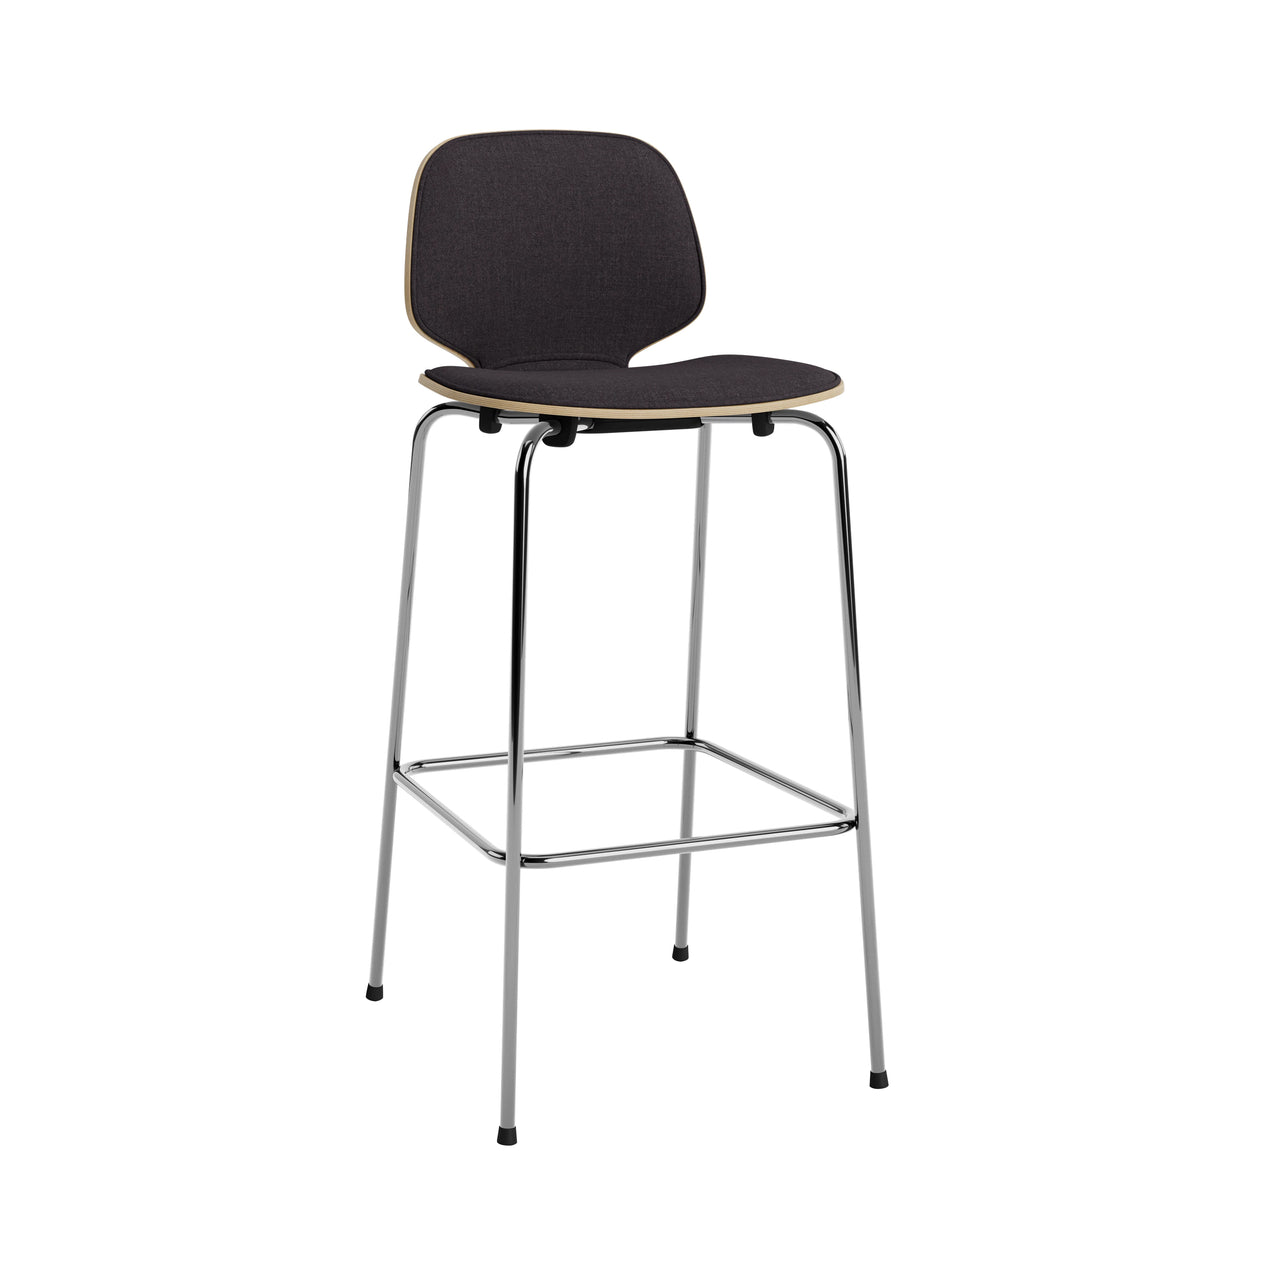 My Chair Bar Stool: Metal Base + Front Upholstered + Chrome Base